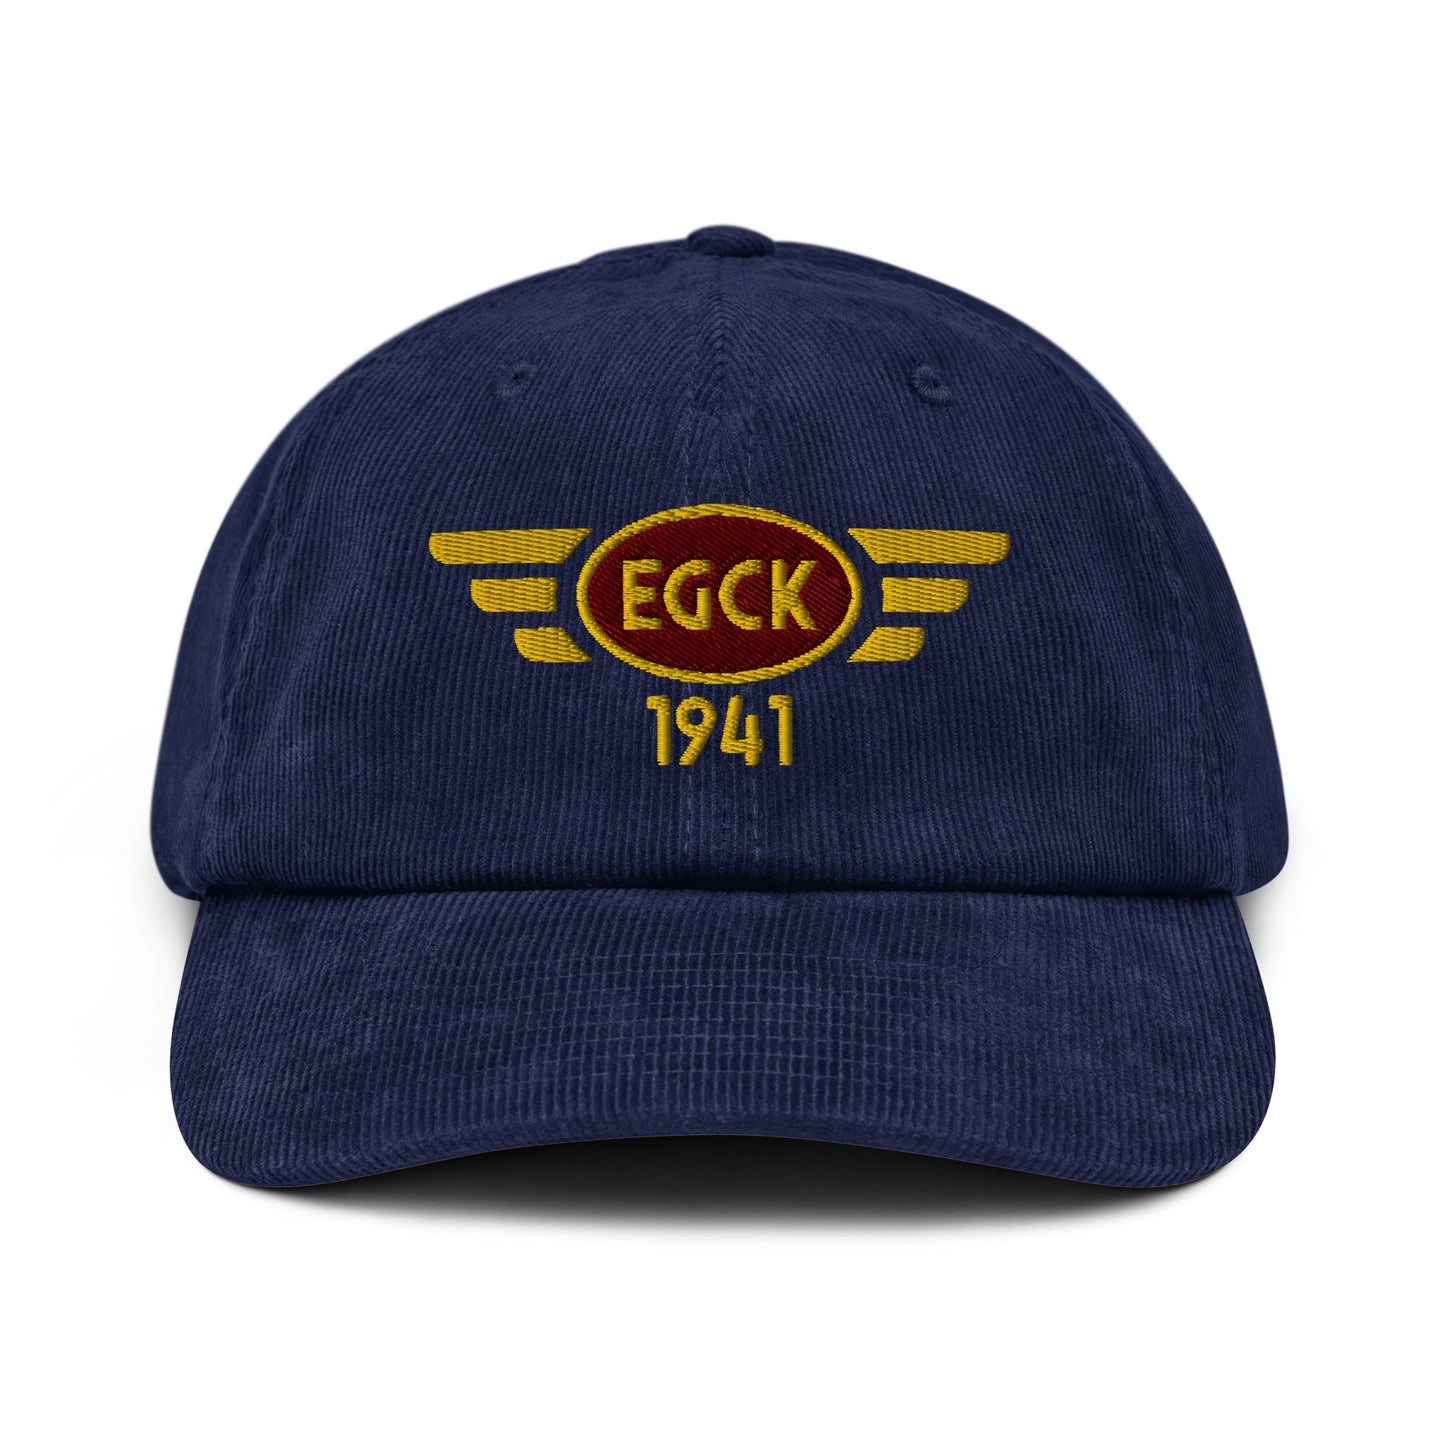 Caernarfon Airport corduroy cap with embroidered ICAO code.